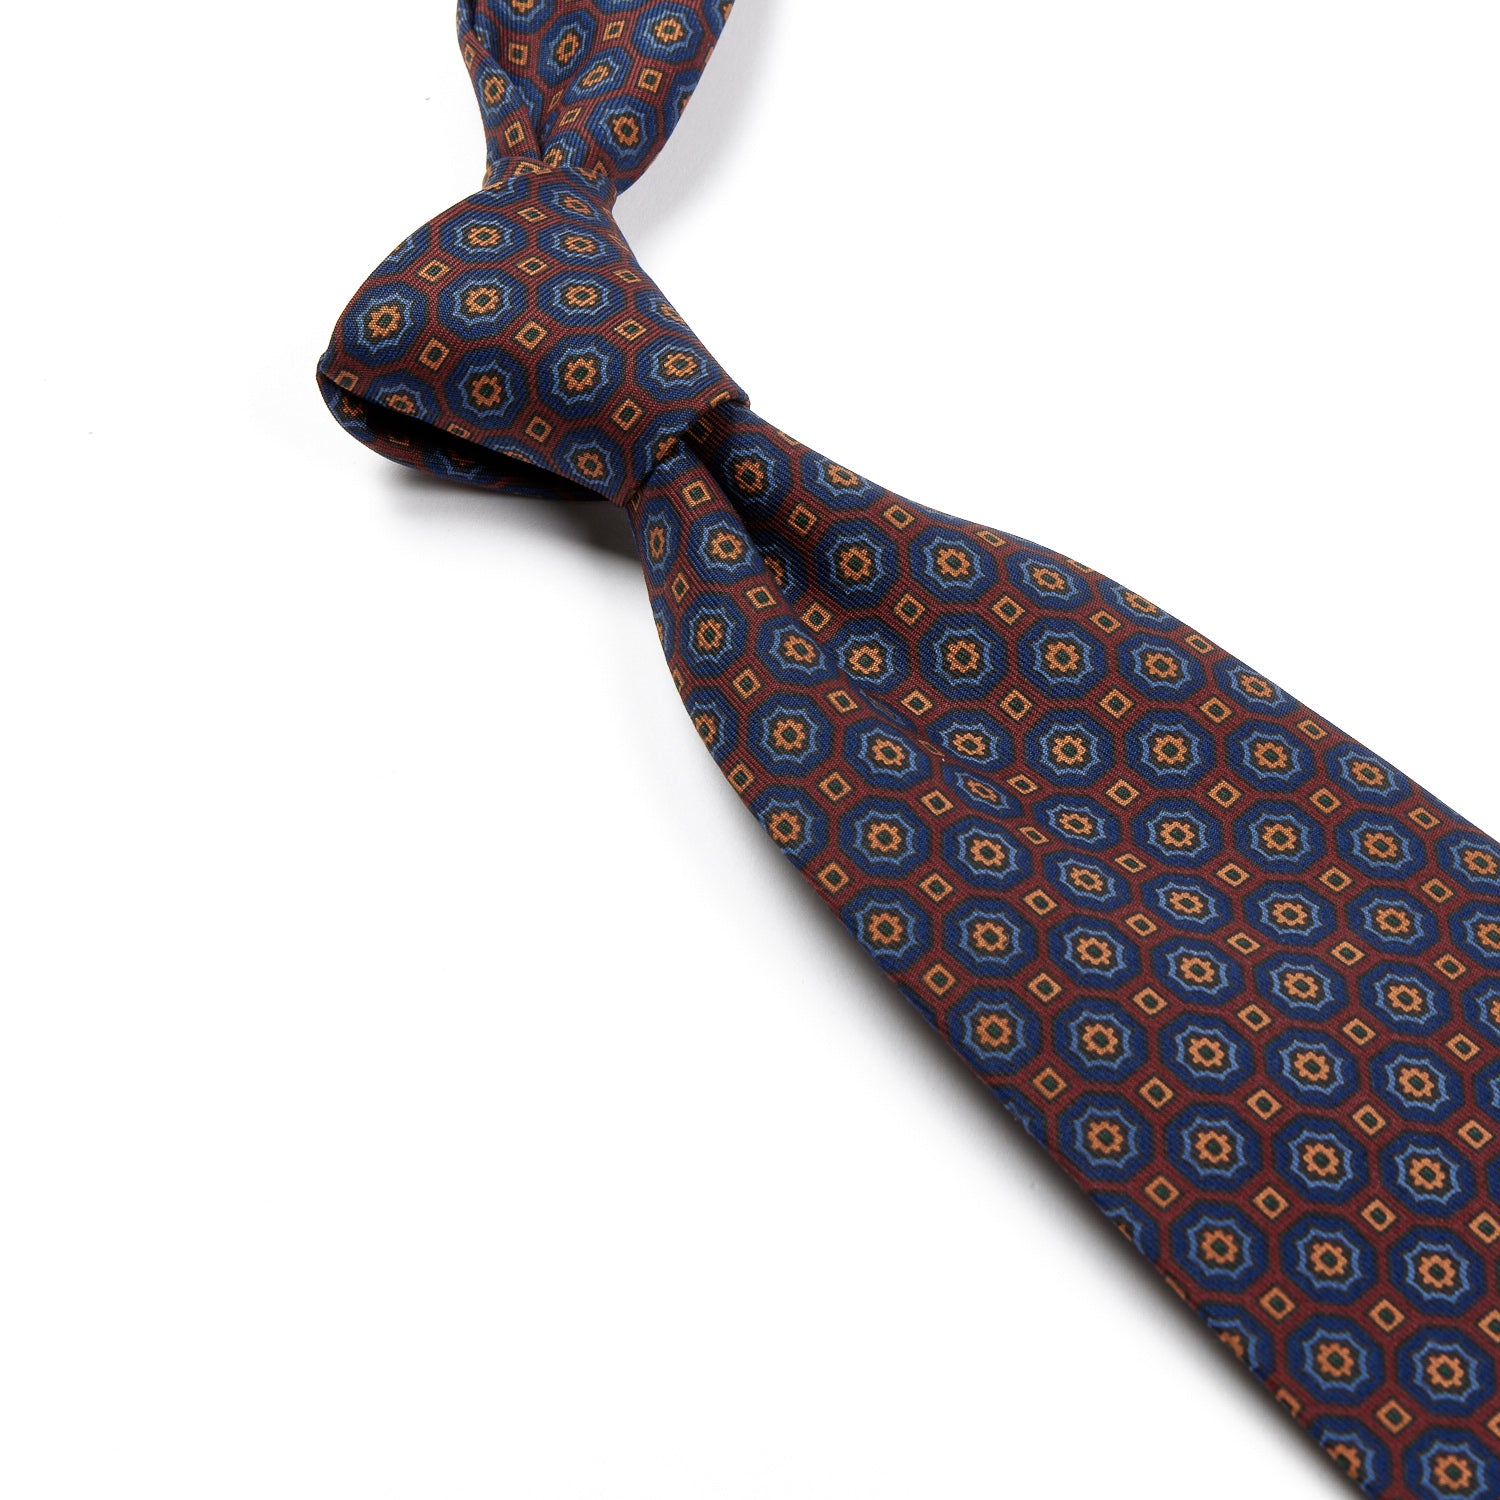 A Sovereign Grade Rust/Blue Floral Medallion Ancient Madder Tie handmade by KirbyAllison.com with a blue and orange pattern.